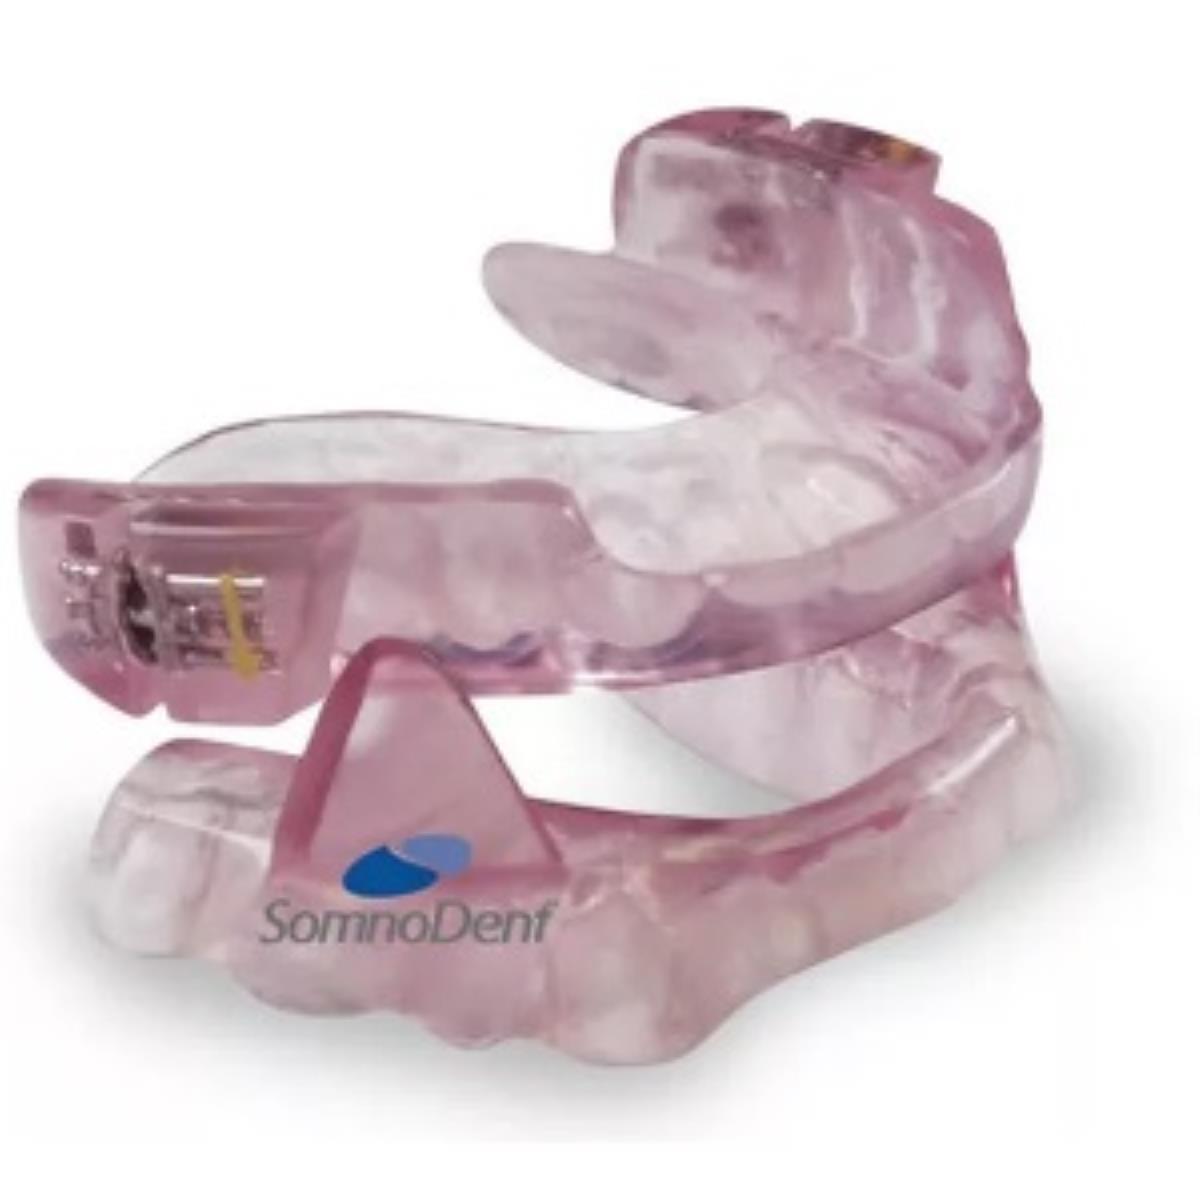 Somnodent Classic Doctor Fitted Sleep Apnea Mouthpiece